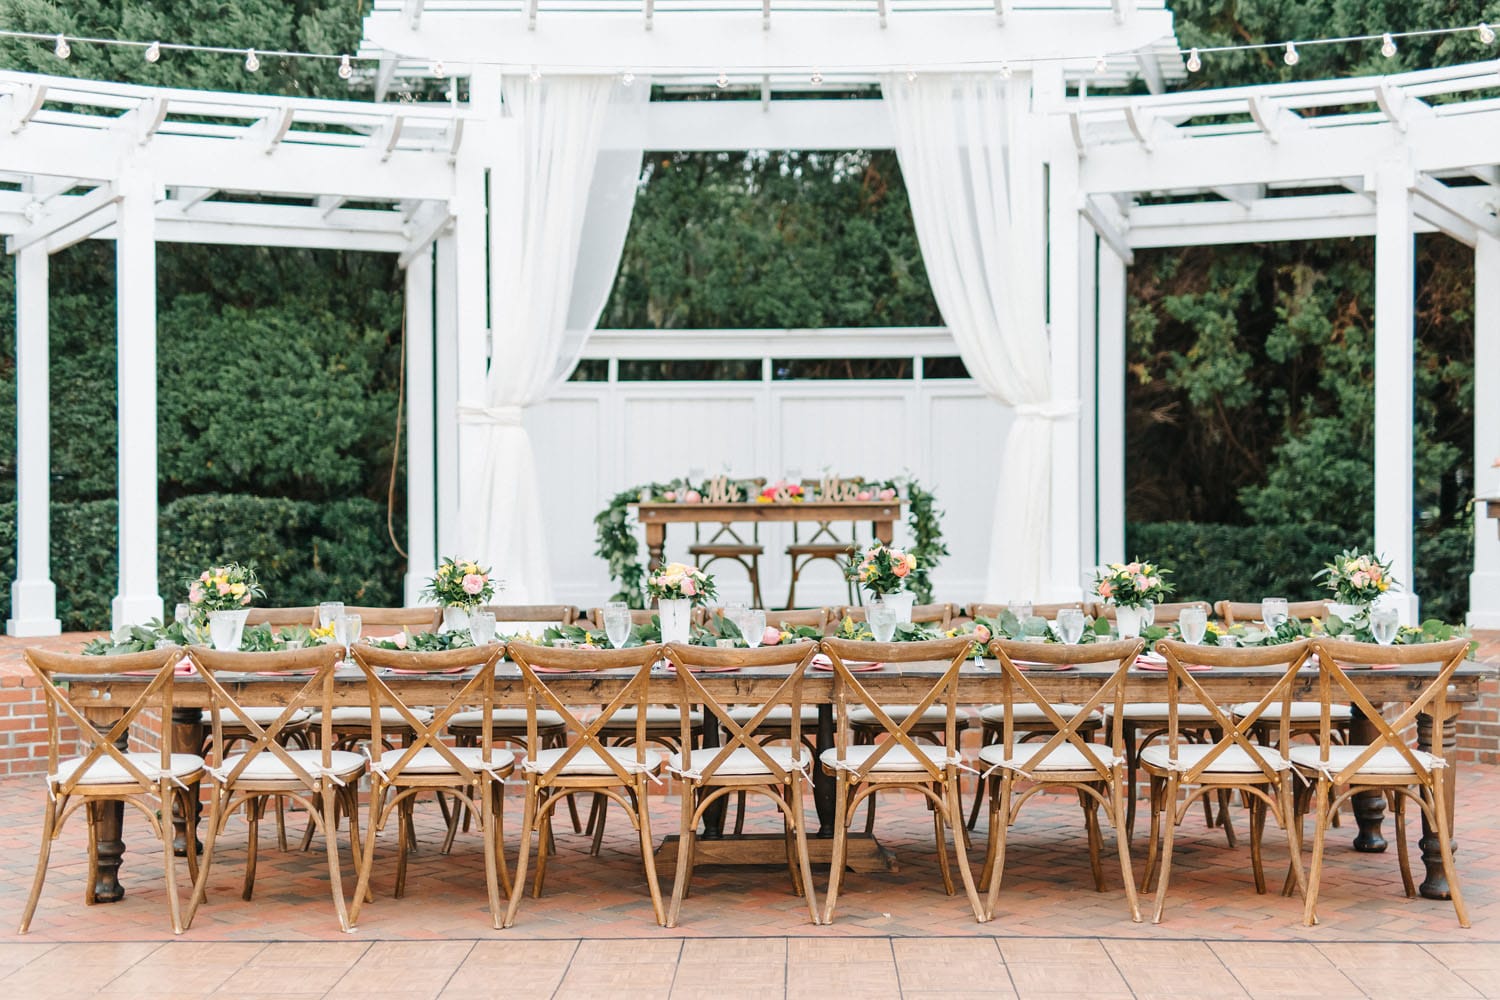 Plan It Events - large rustic reception table with touches of glam